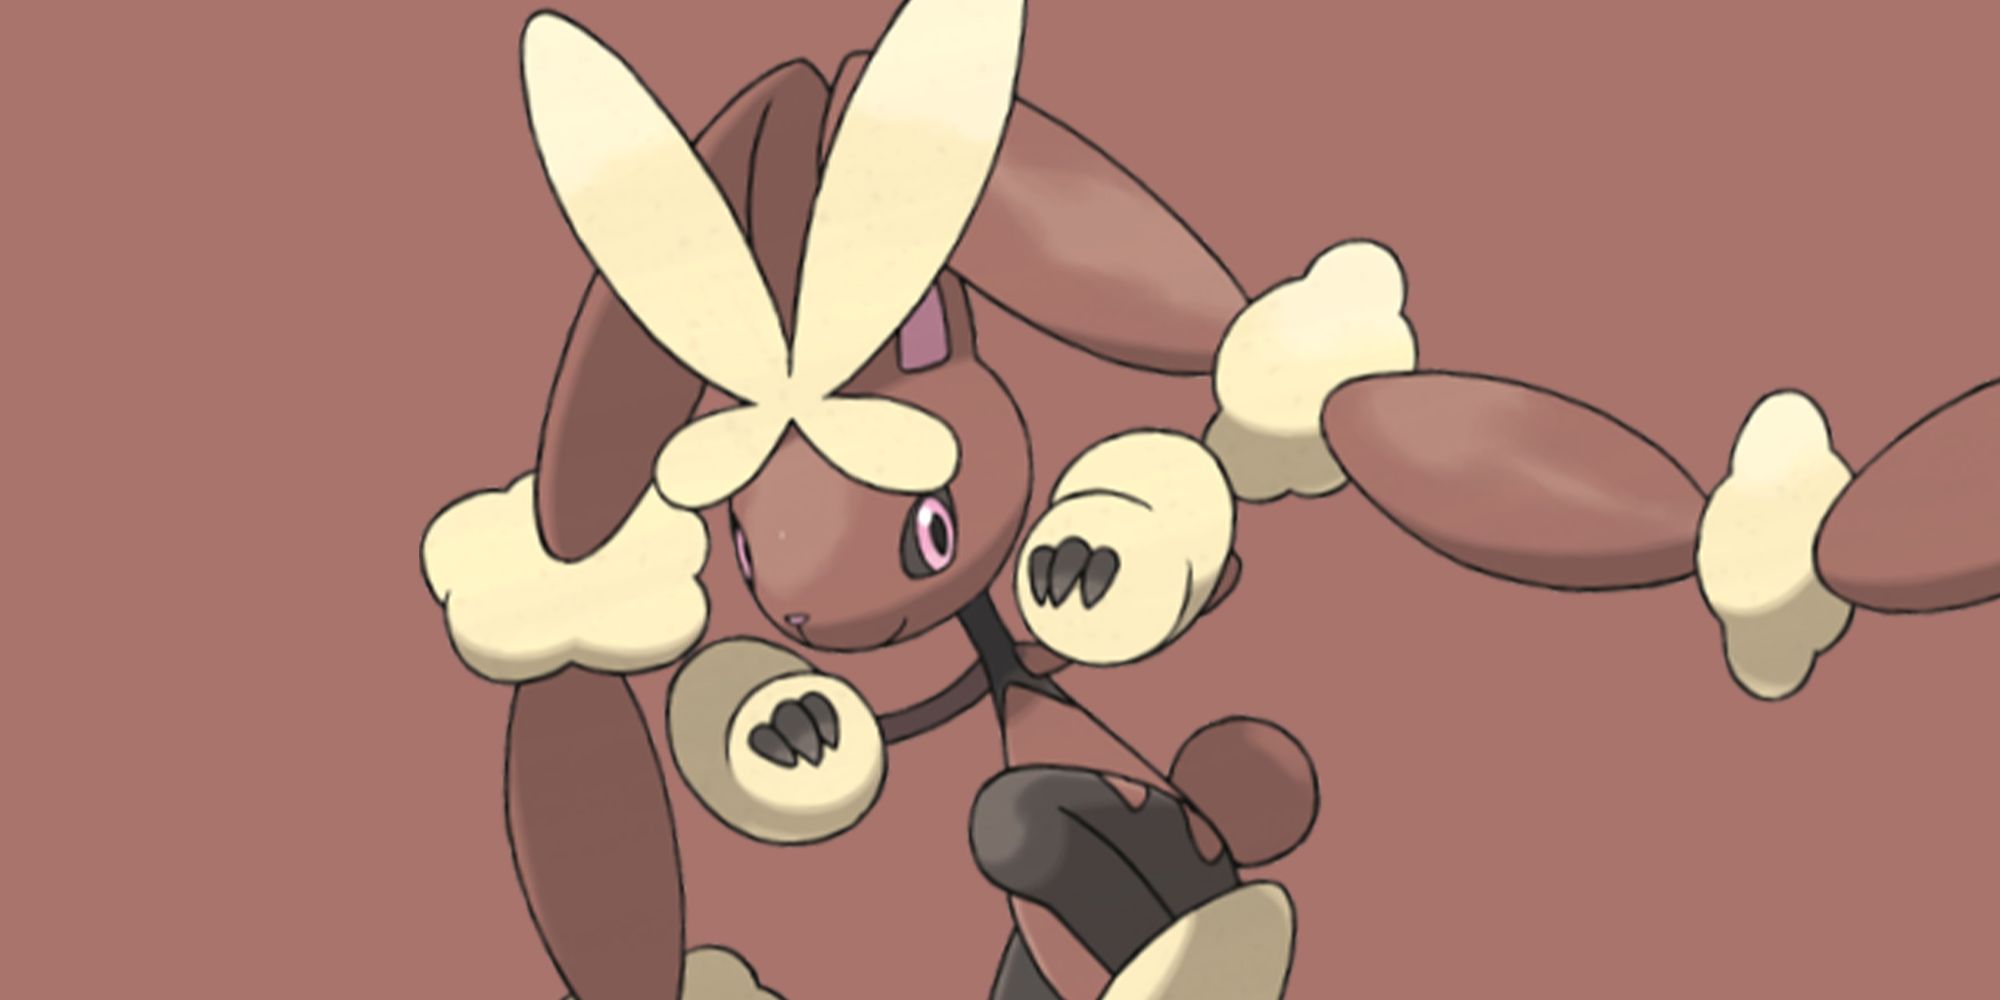 Mega Lopunny from Pokemon Go poses with a brown background